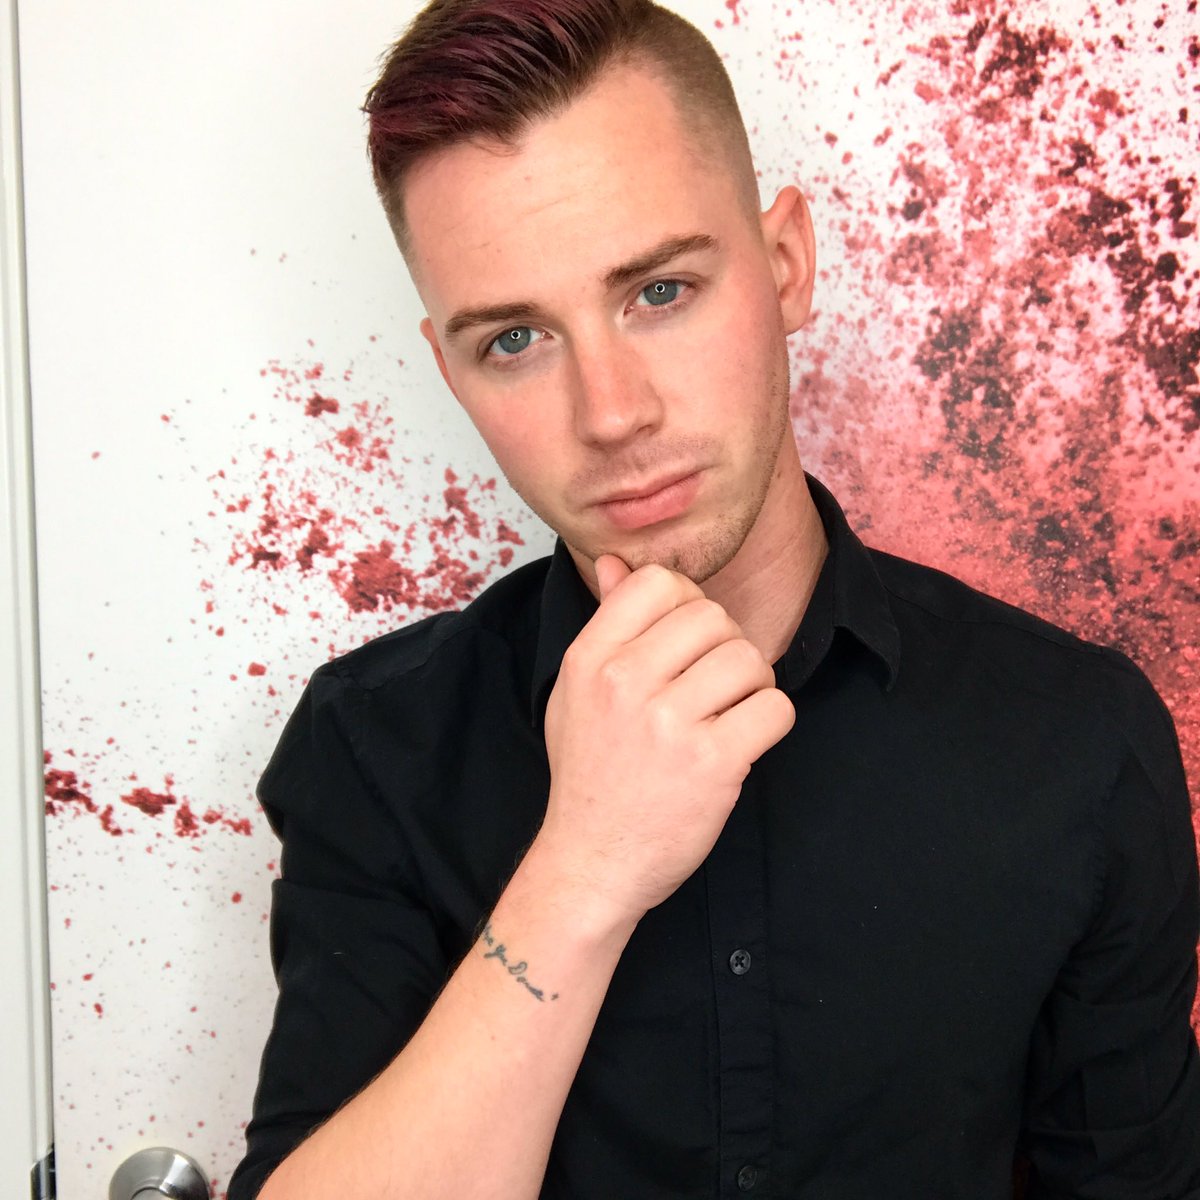 Kyler Ash On Twitter Feeling So Handsome At Work Today Twink 